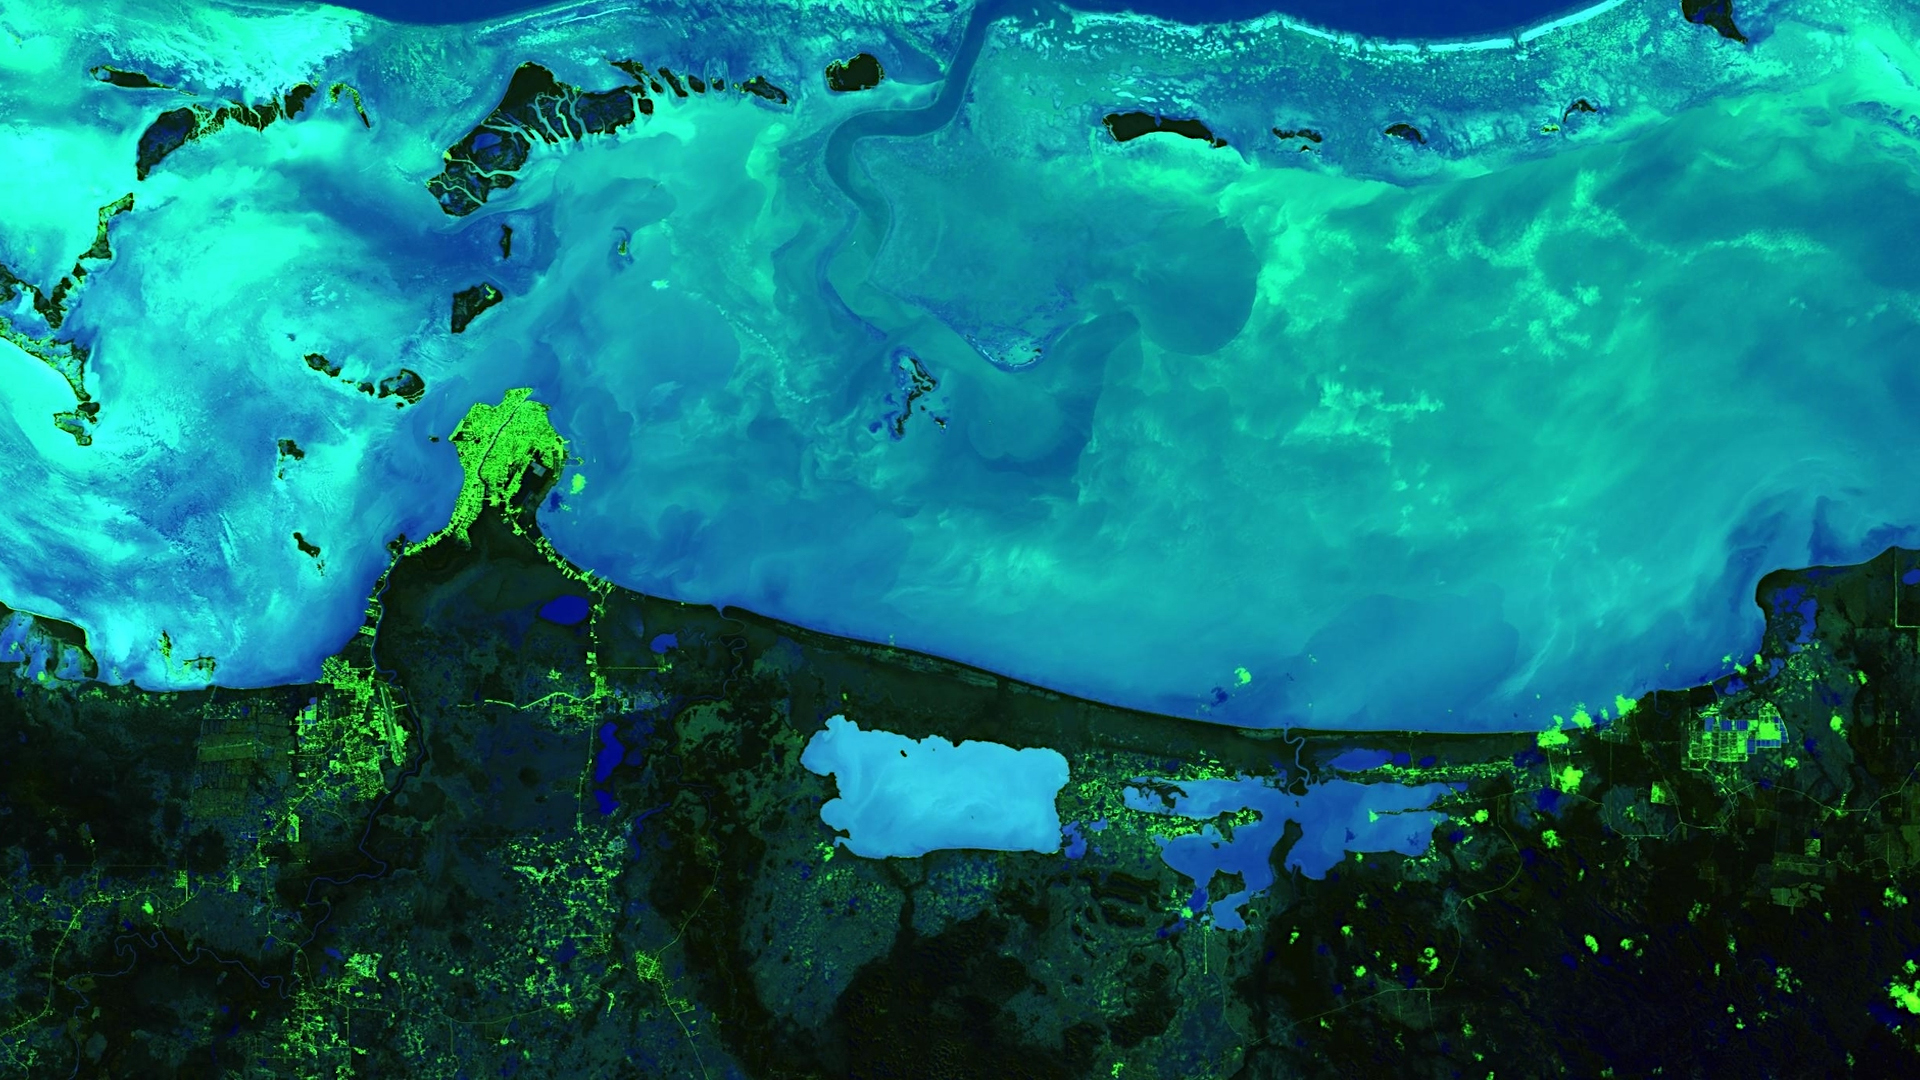 Colored Dissolved Organic Matter (CDOM) derived using Landsat 8 OLI data on January 28th, 2019 off the coast of Belize City. Darker shades of blue indicate higher levels of CDOM, while lighter blue shades show lower levels of CDOM in the coastal and inland waters. Very high levels of CDOM can inhibit photosynthesis; thus, the visualization of CDOM allows coastal management to identify regions where reef health and water quality are at risk.Keywords: Landsat 8, CDOM, Belize